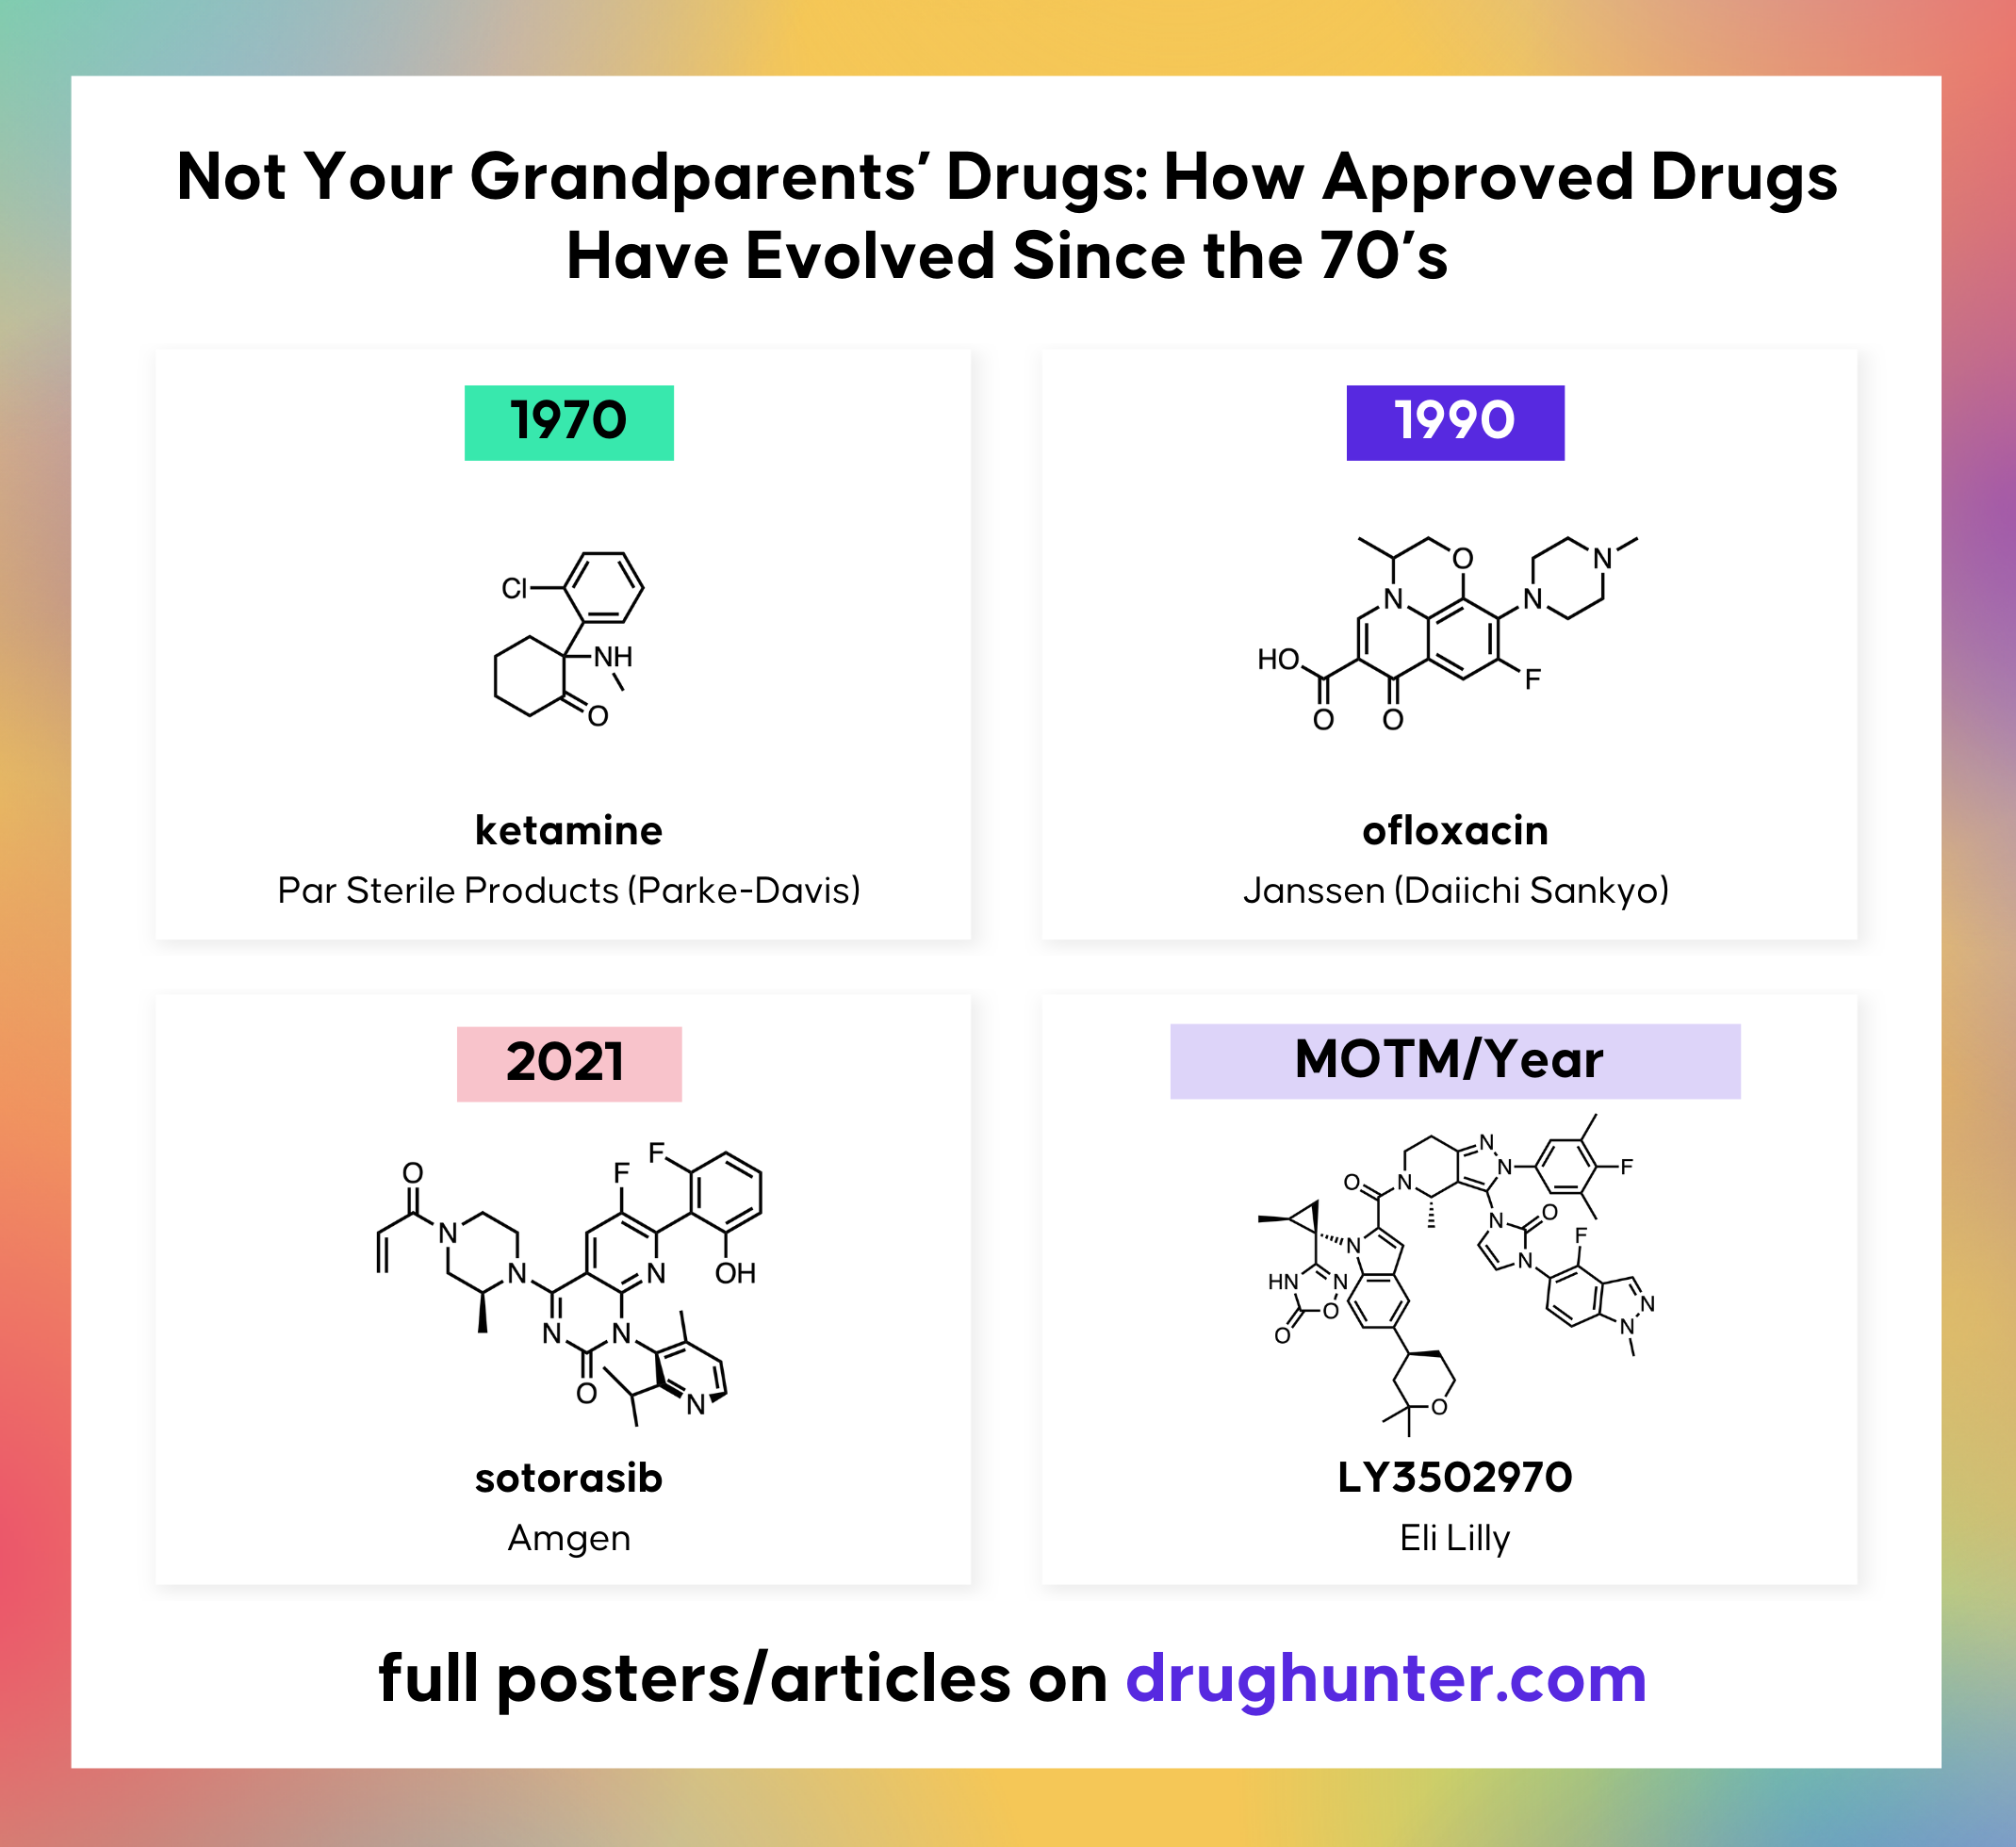 Not Your Grandparents’ Drugs: How Approved Drugs Have Evolved Since the 70’s||Not Your Grandparents’ Drugs: How Approved Drugs Have Evolved Since the 70’s